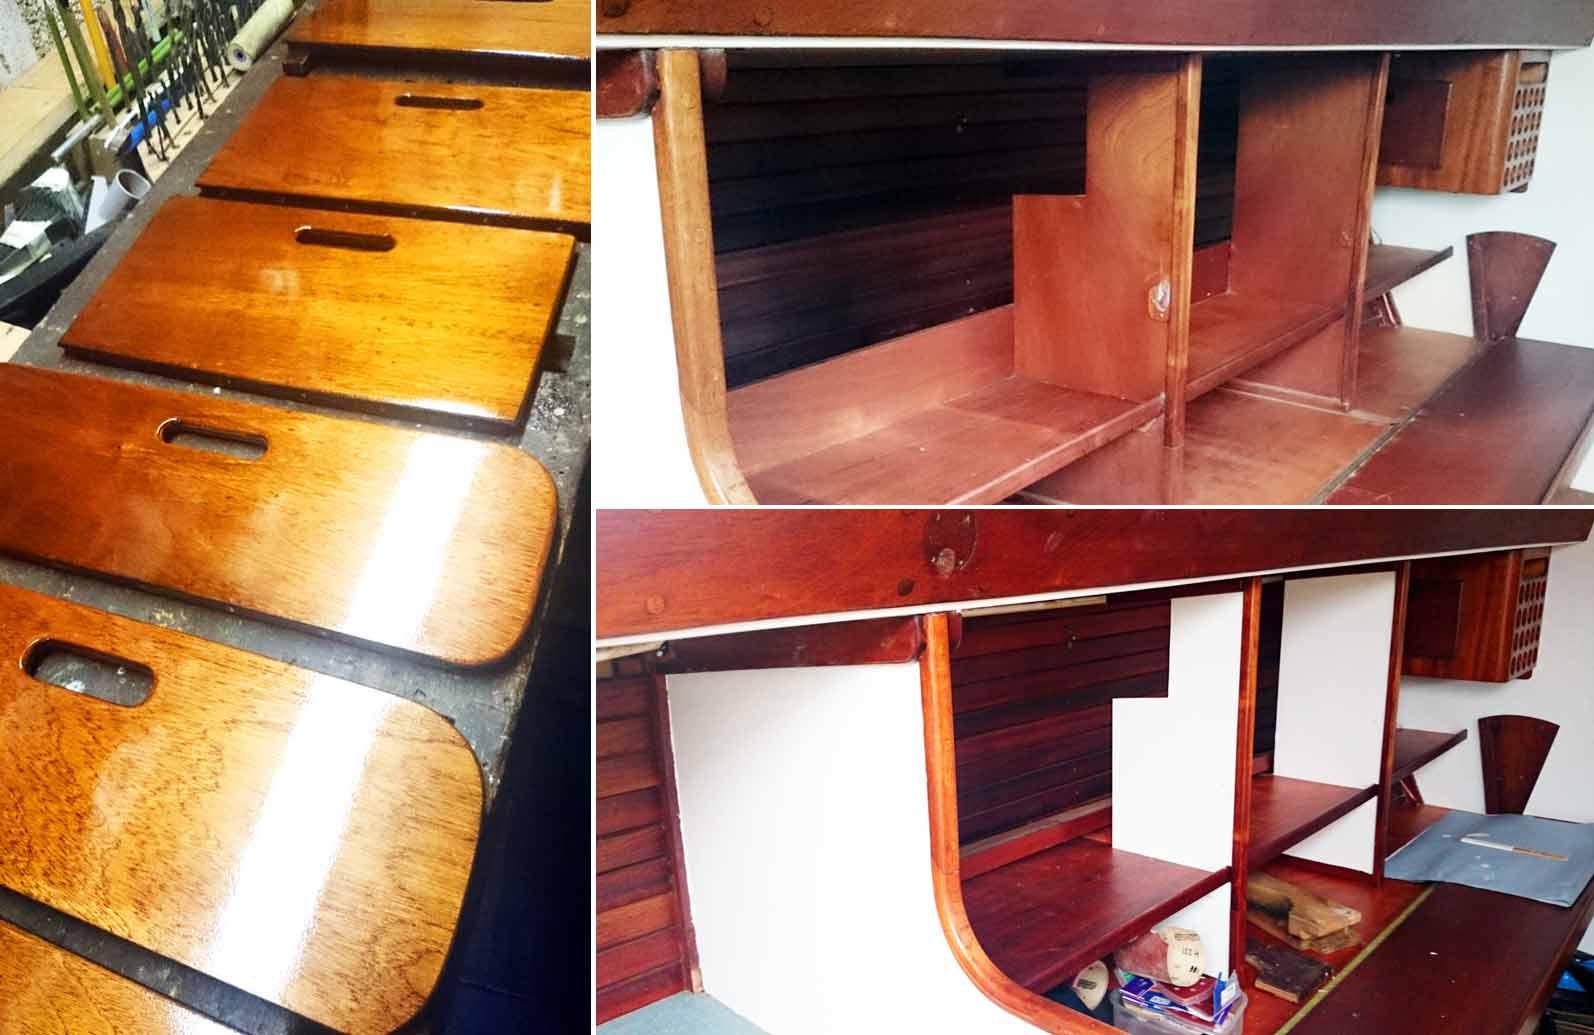 Refurbishing and painting the stowage amidships.